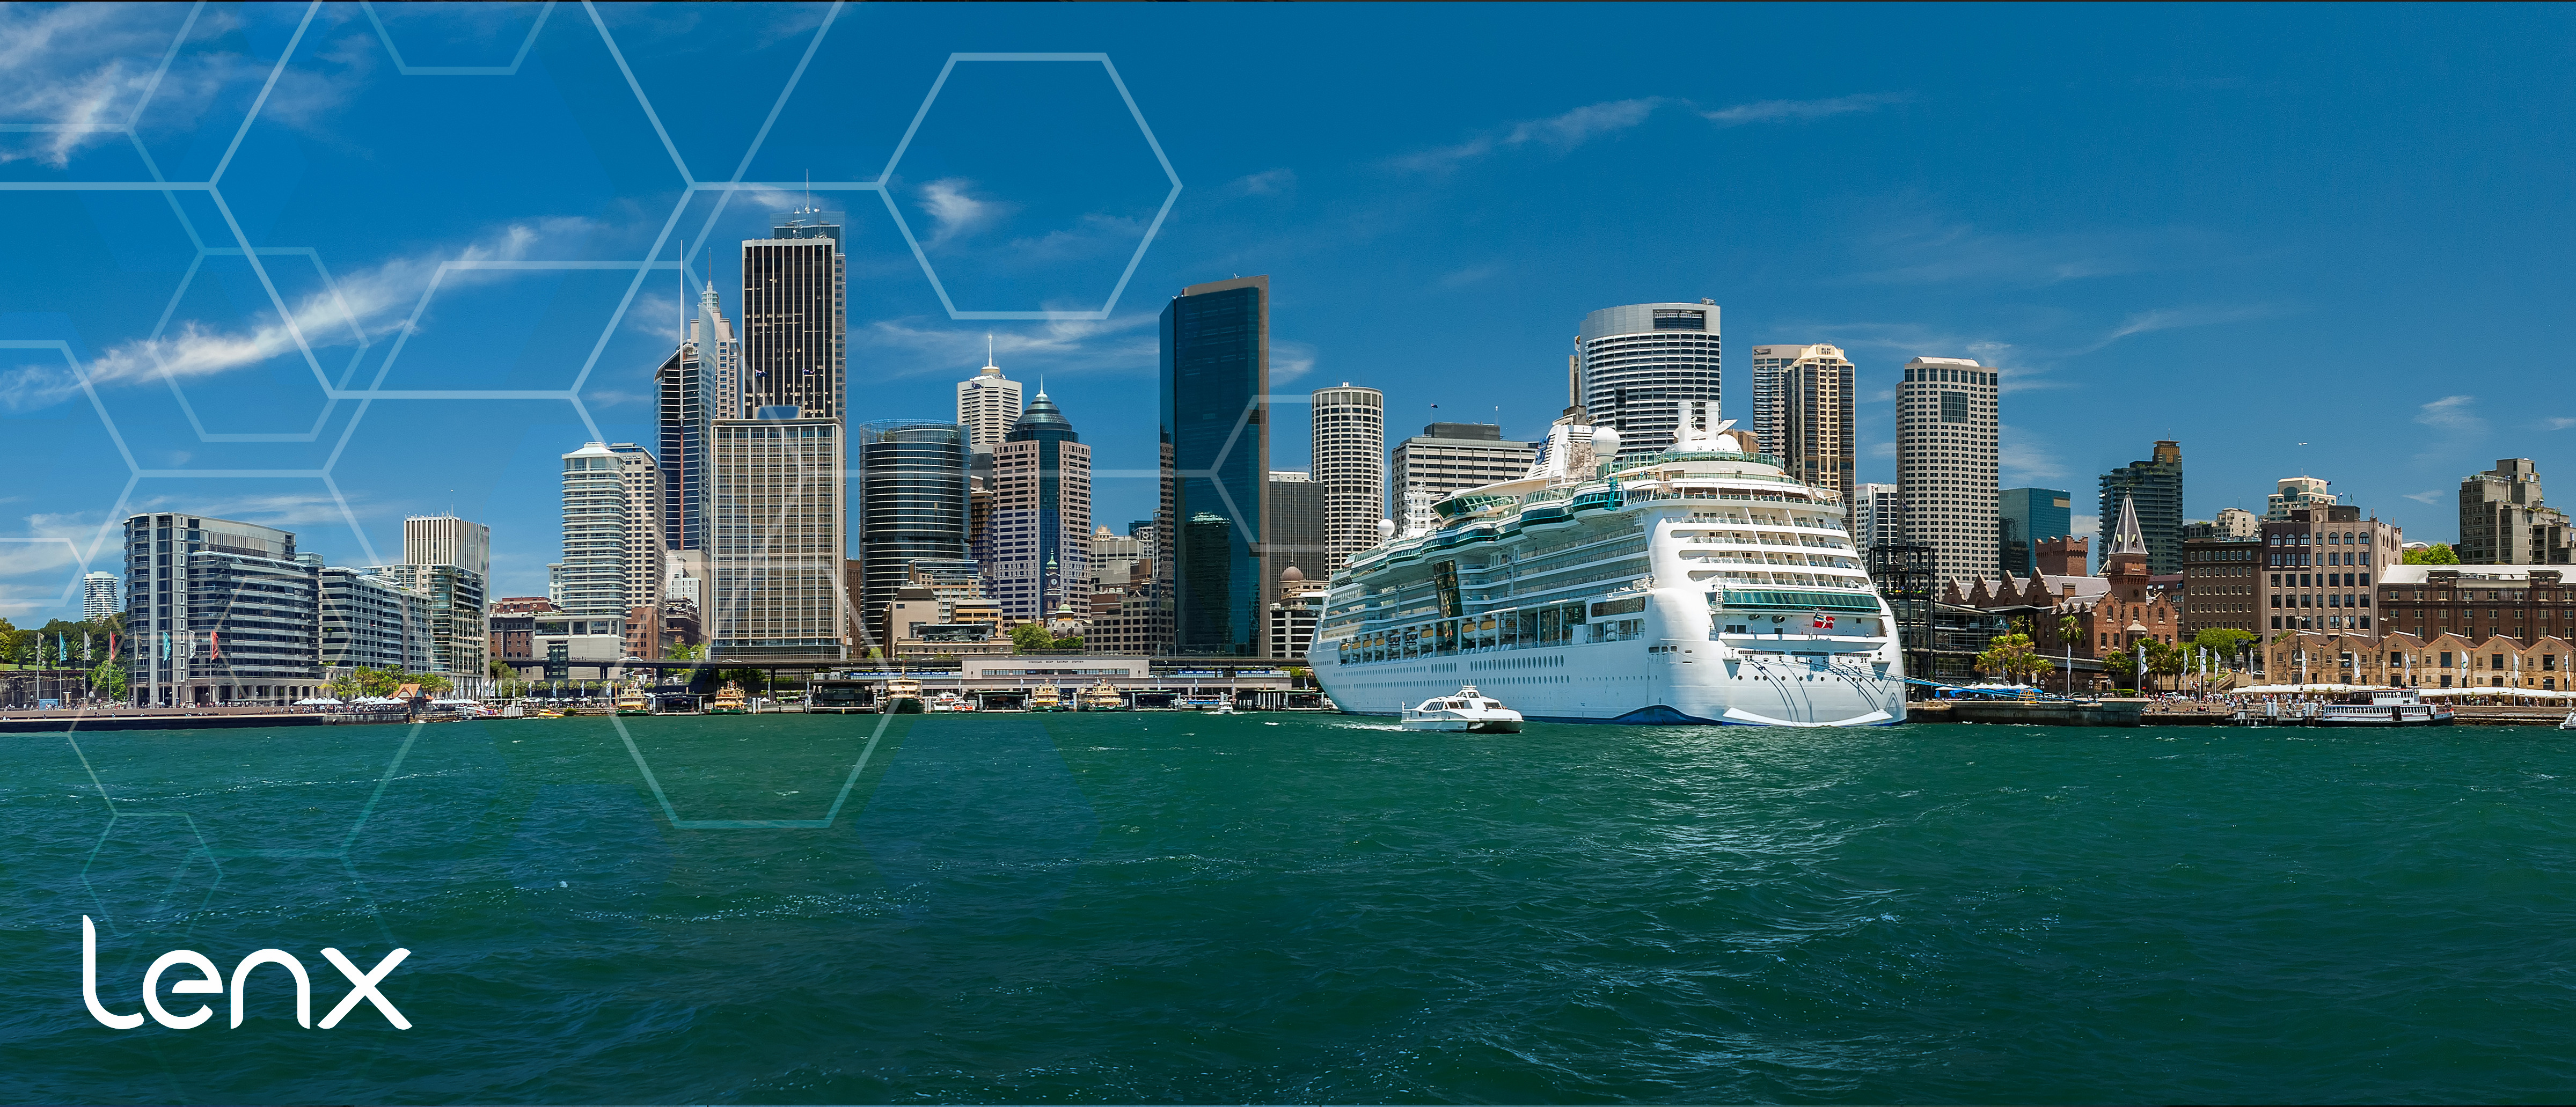 AI Security and Active Shooter Detection Systems For Cruise Ships